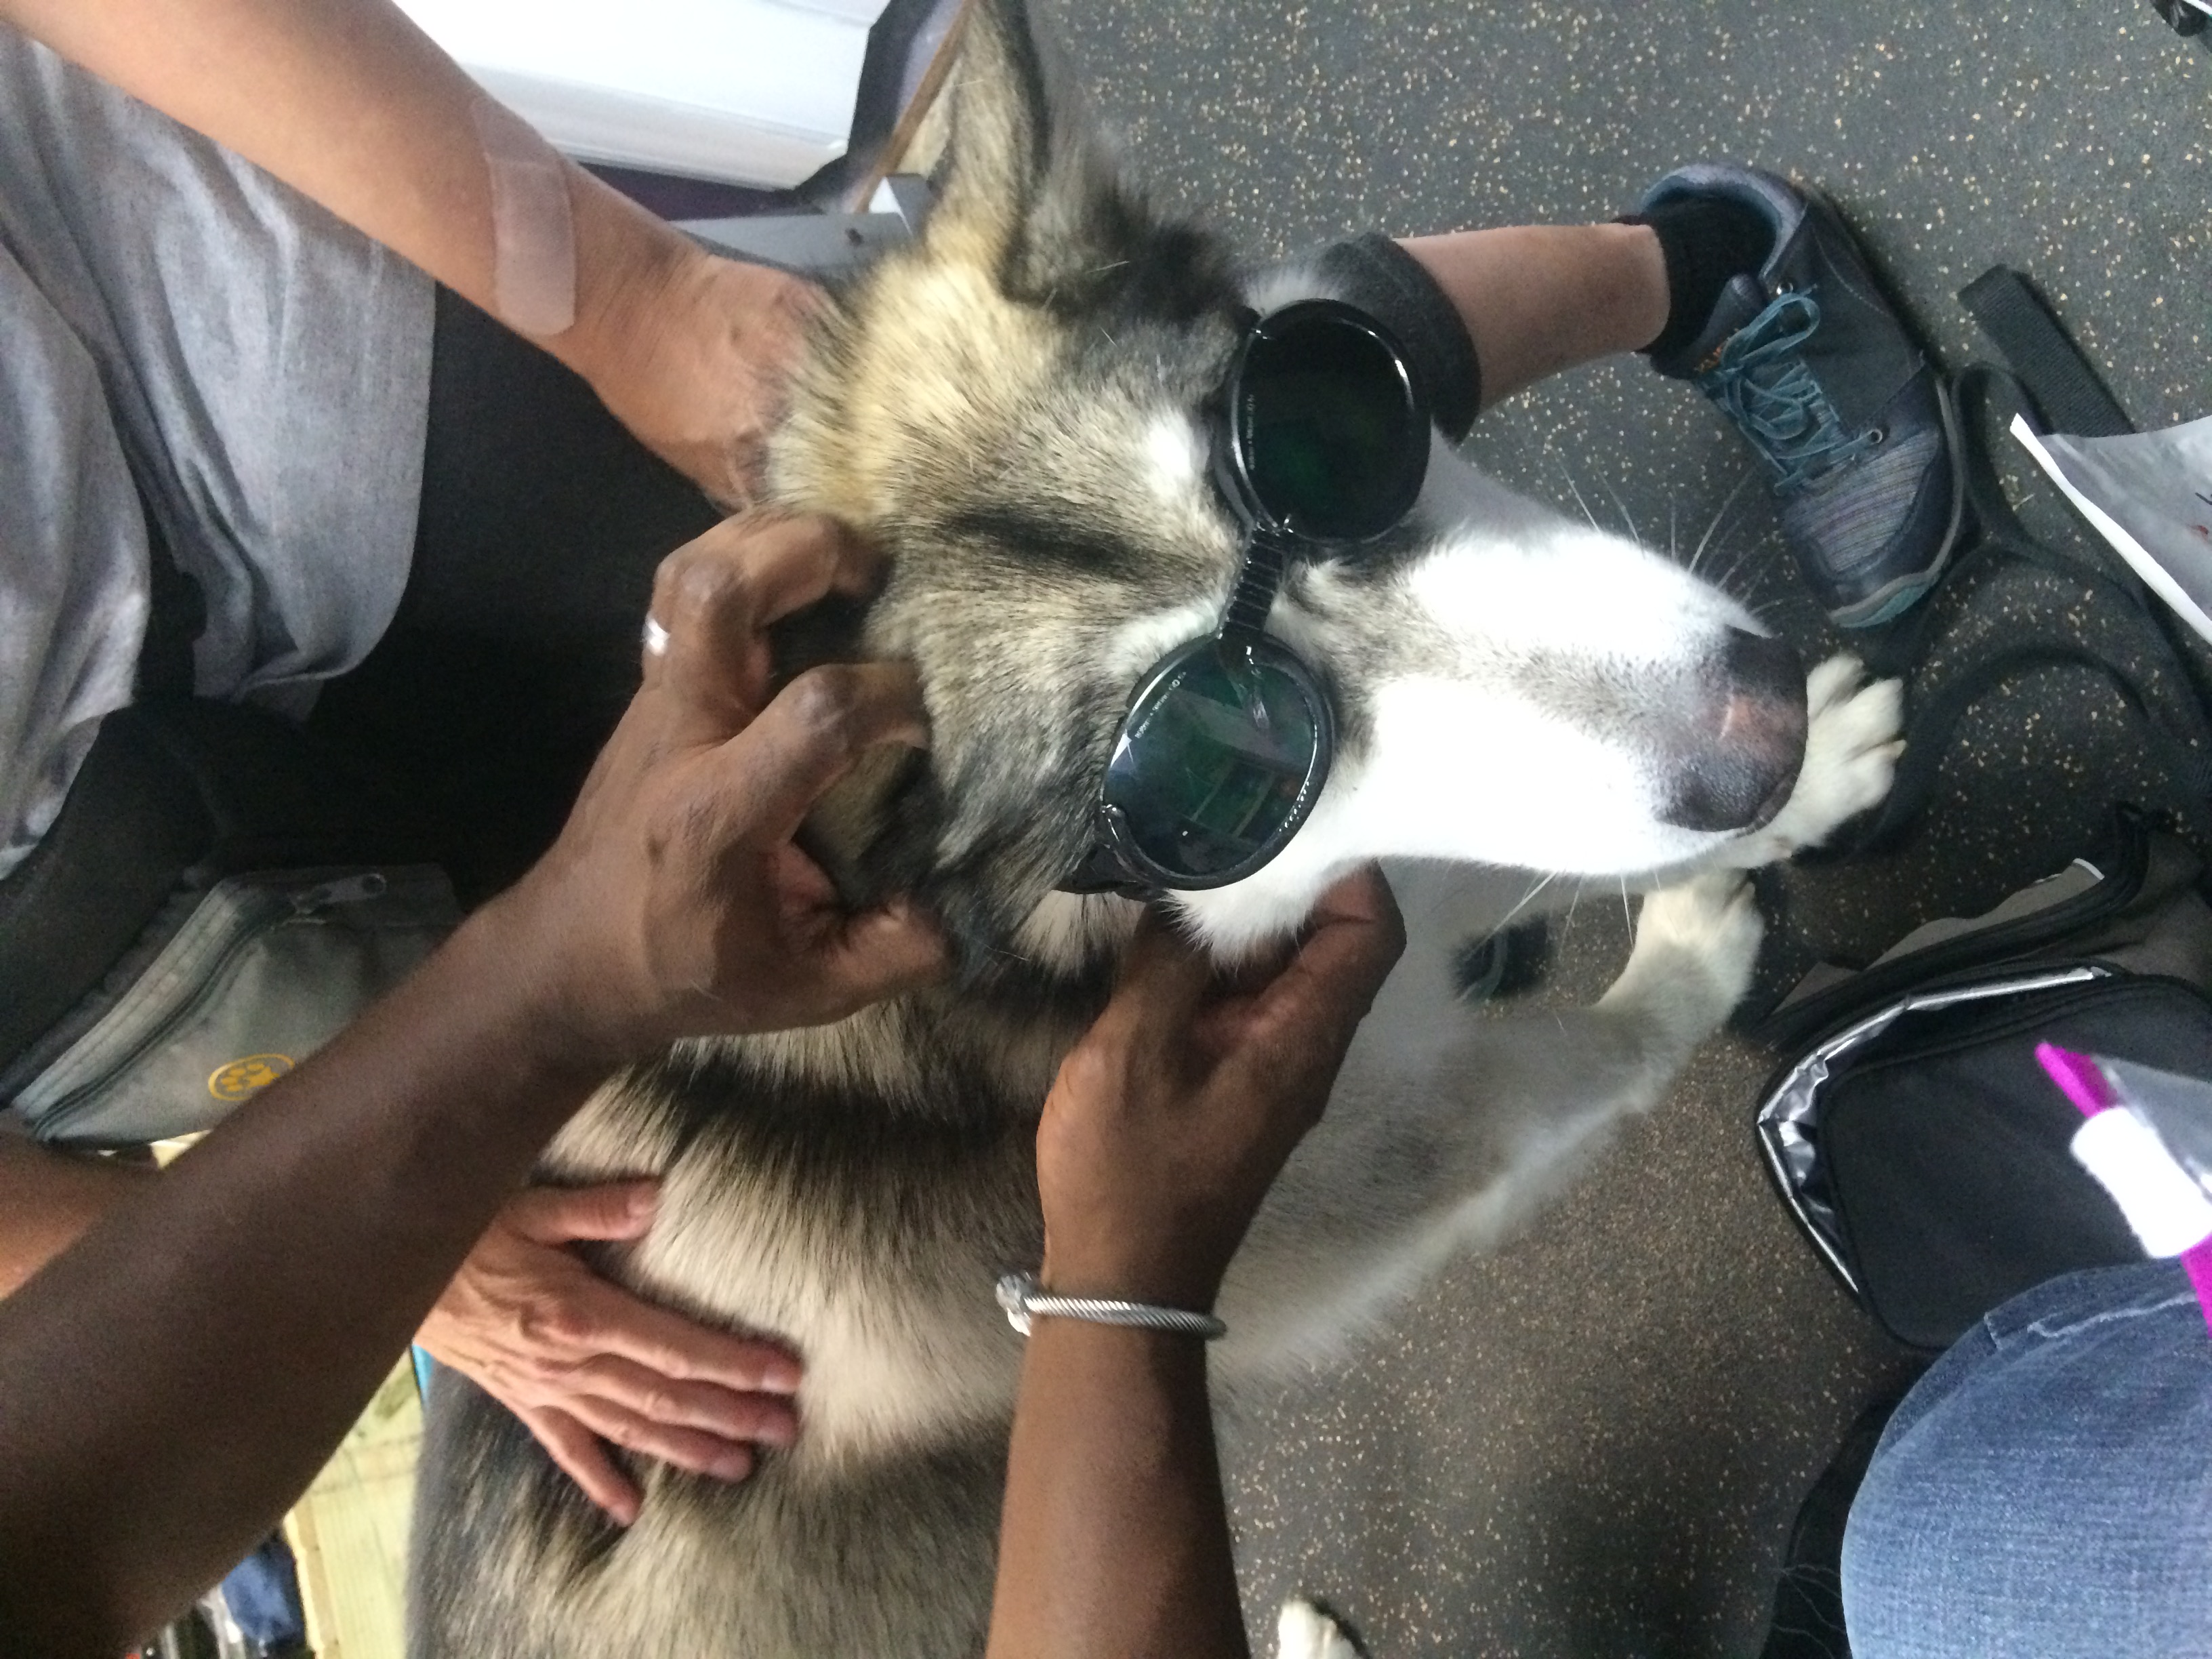 Balto getting laser therapy to relieve pain